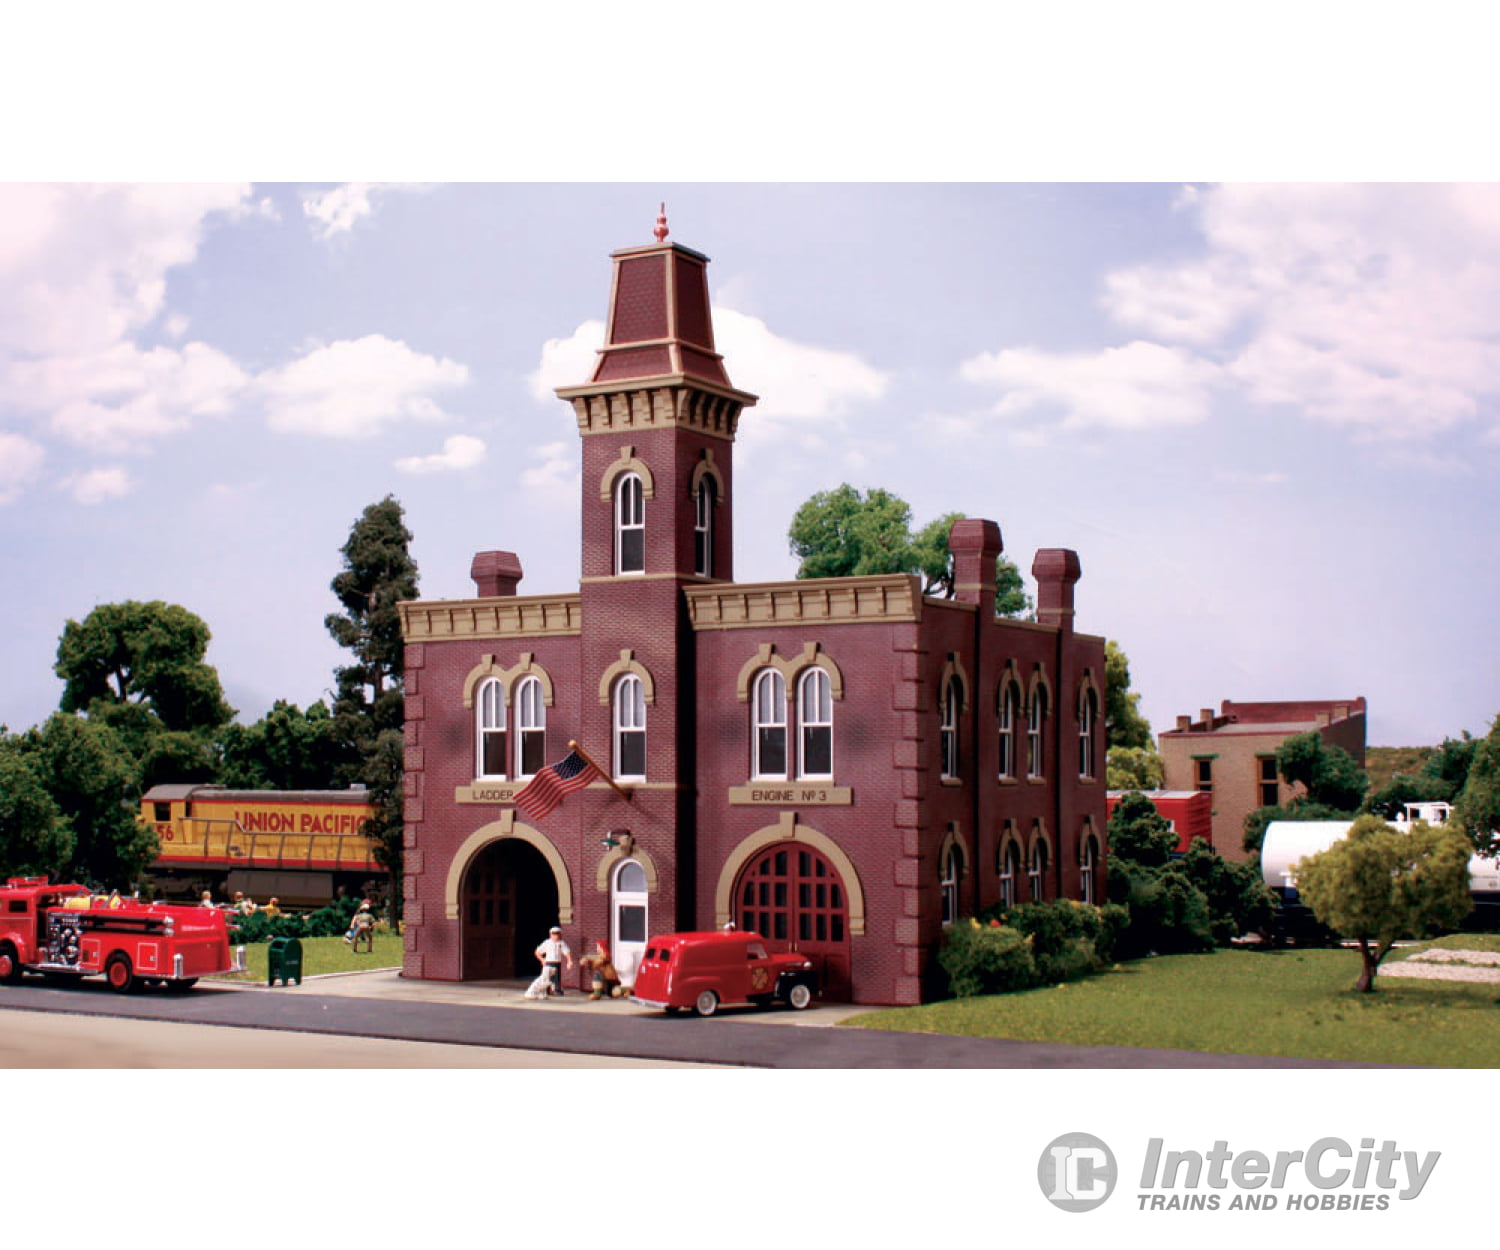 Woodland Scenics 5034 Firehouse (Lit) Ho Scale Structures